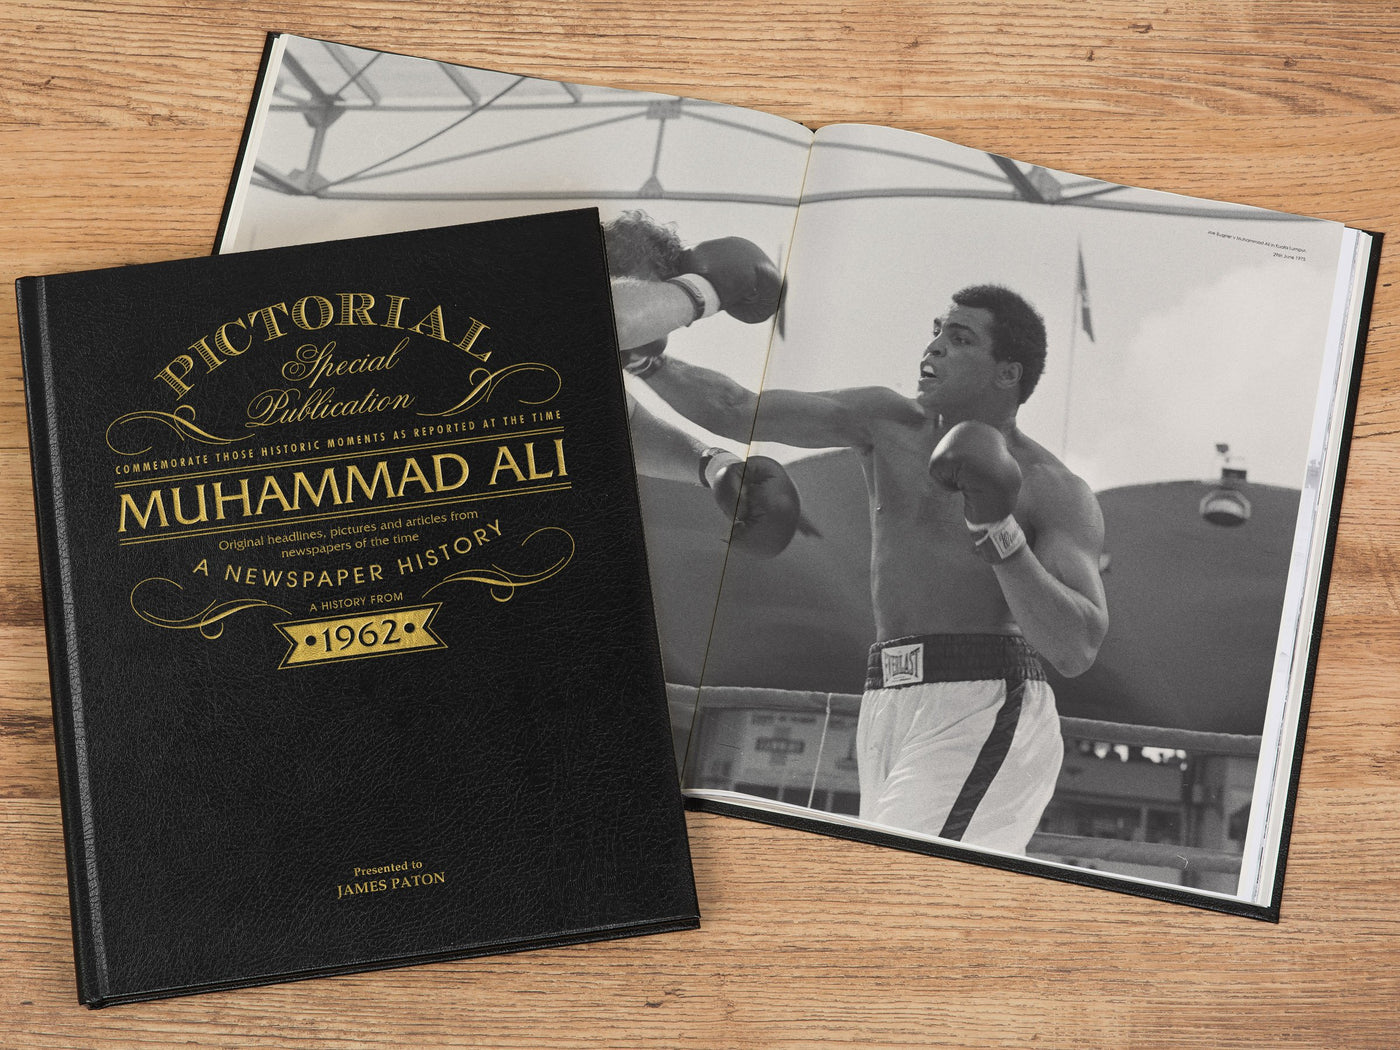 Muhammad Ali Pictorial Edition Newspaper Book - Shop Personalised Gifts